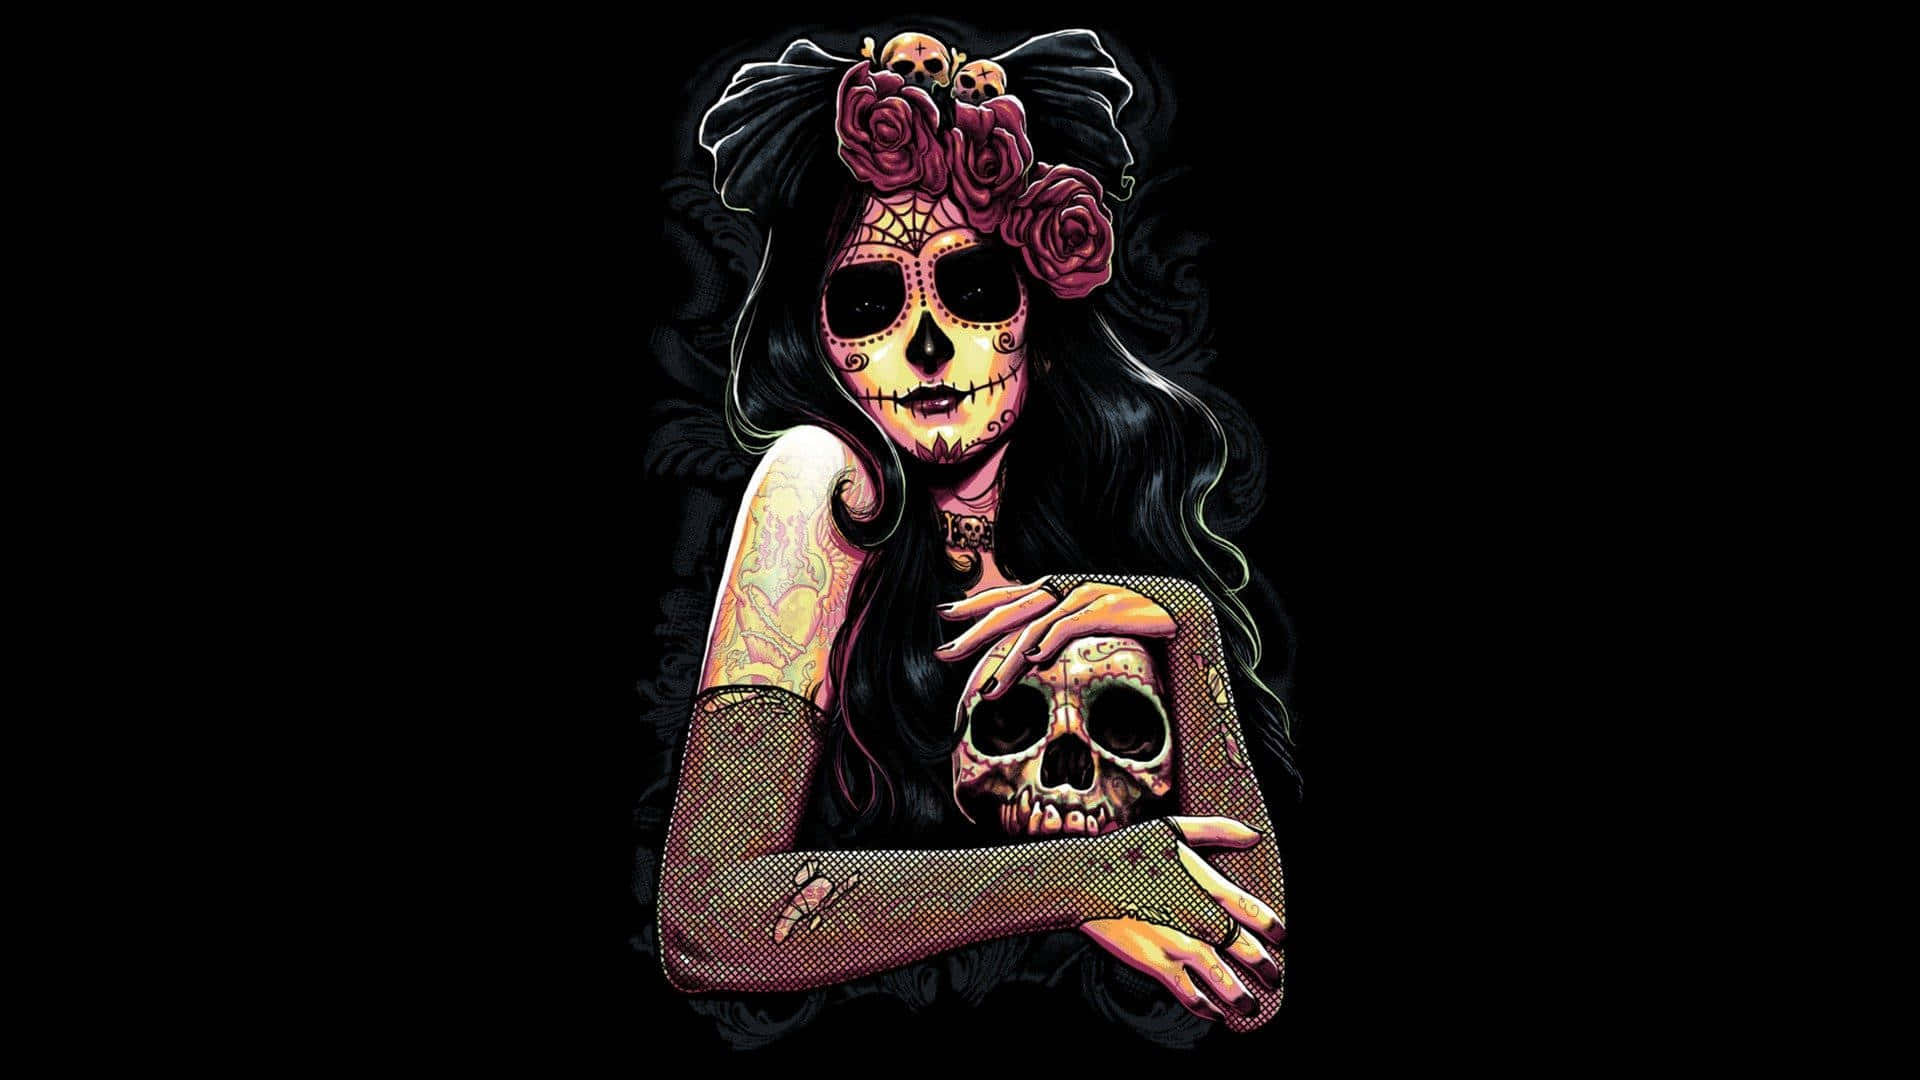 Cool Skull Lady Profile Picture